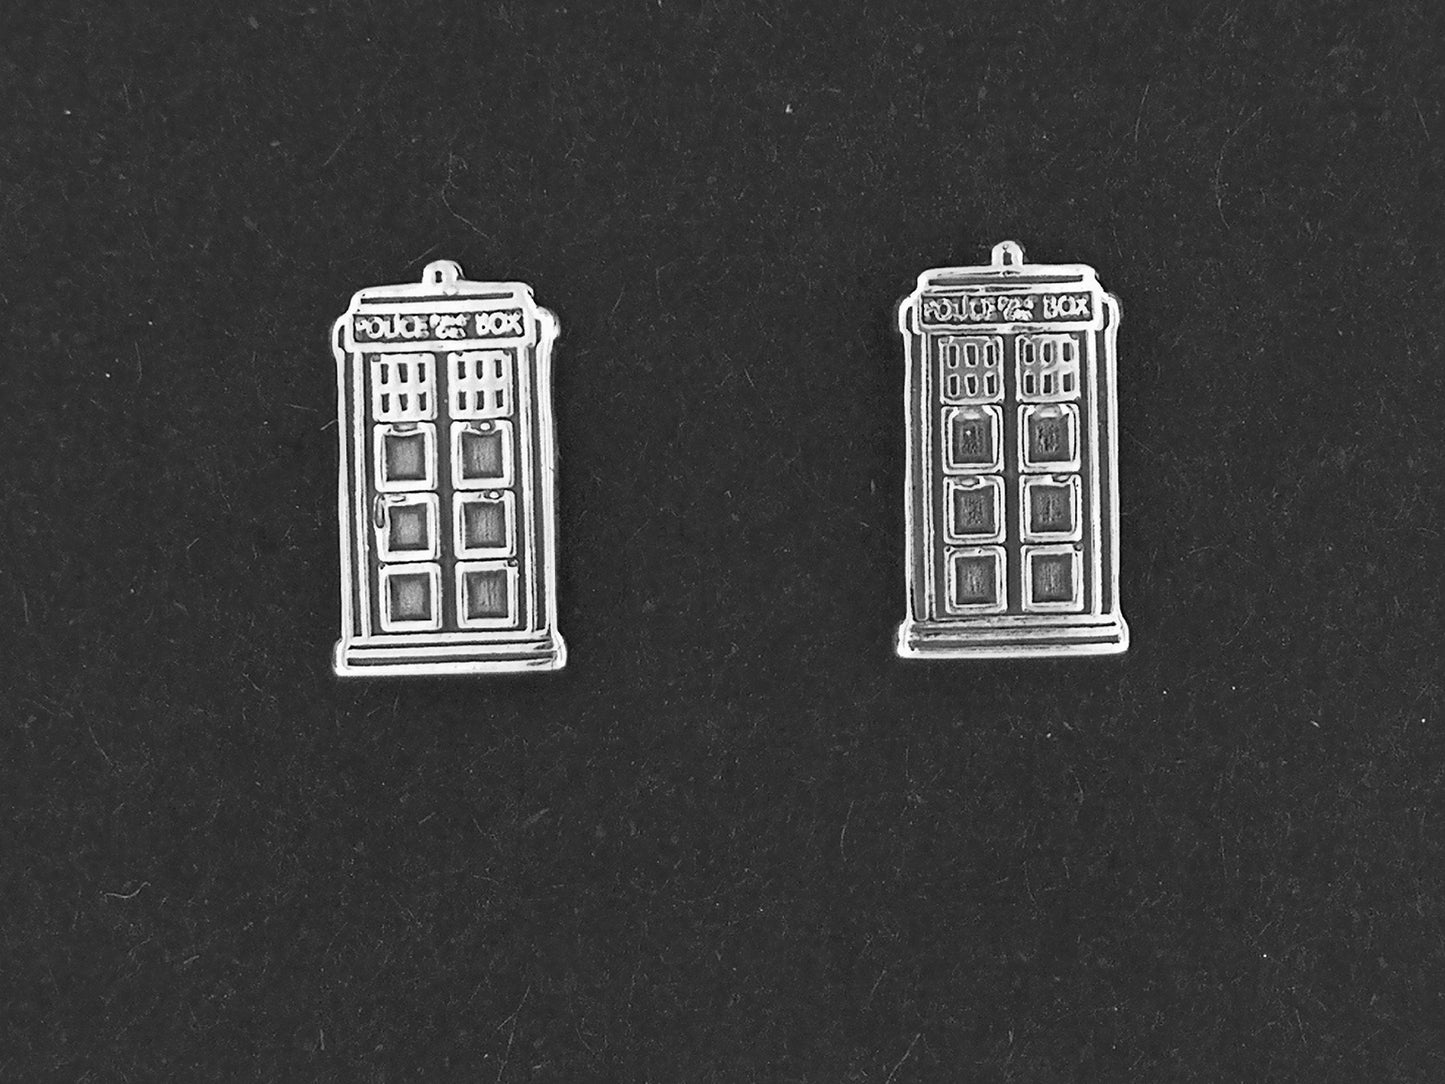 Gold Dr Who Tardis Stud Earrings made to order, Dr Who Earrings, Phone Box Stud Earrings, Sci-Fi Stud Earrings, Gold Police Box Earrings, Gold Stud Earrings,  Gold Phone Box Studs, Dr Who Phone Box Earrings, Dr Who Jewelry, Gold Tardis Earrings